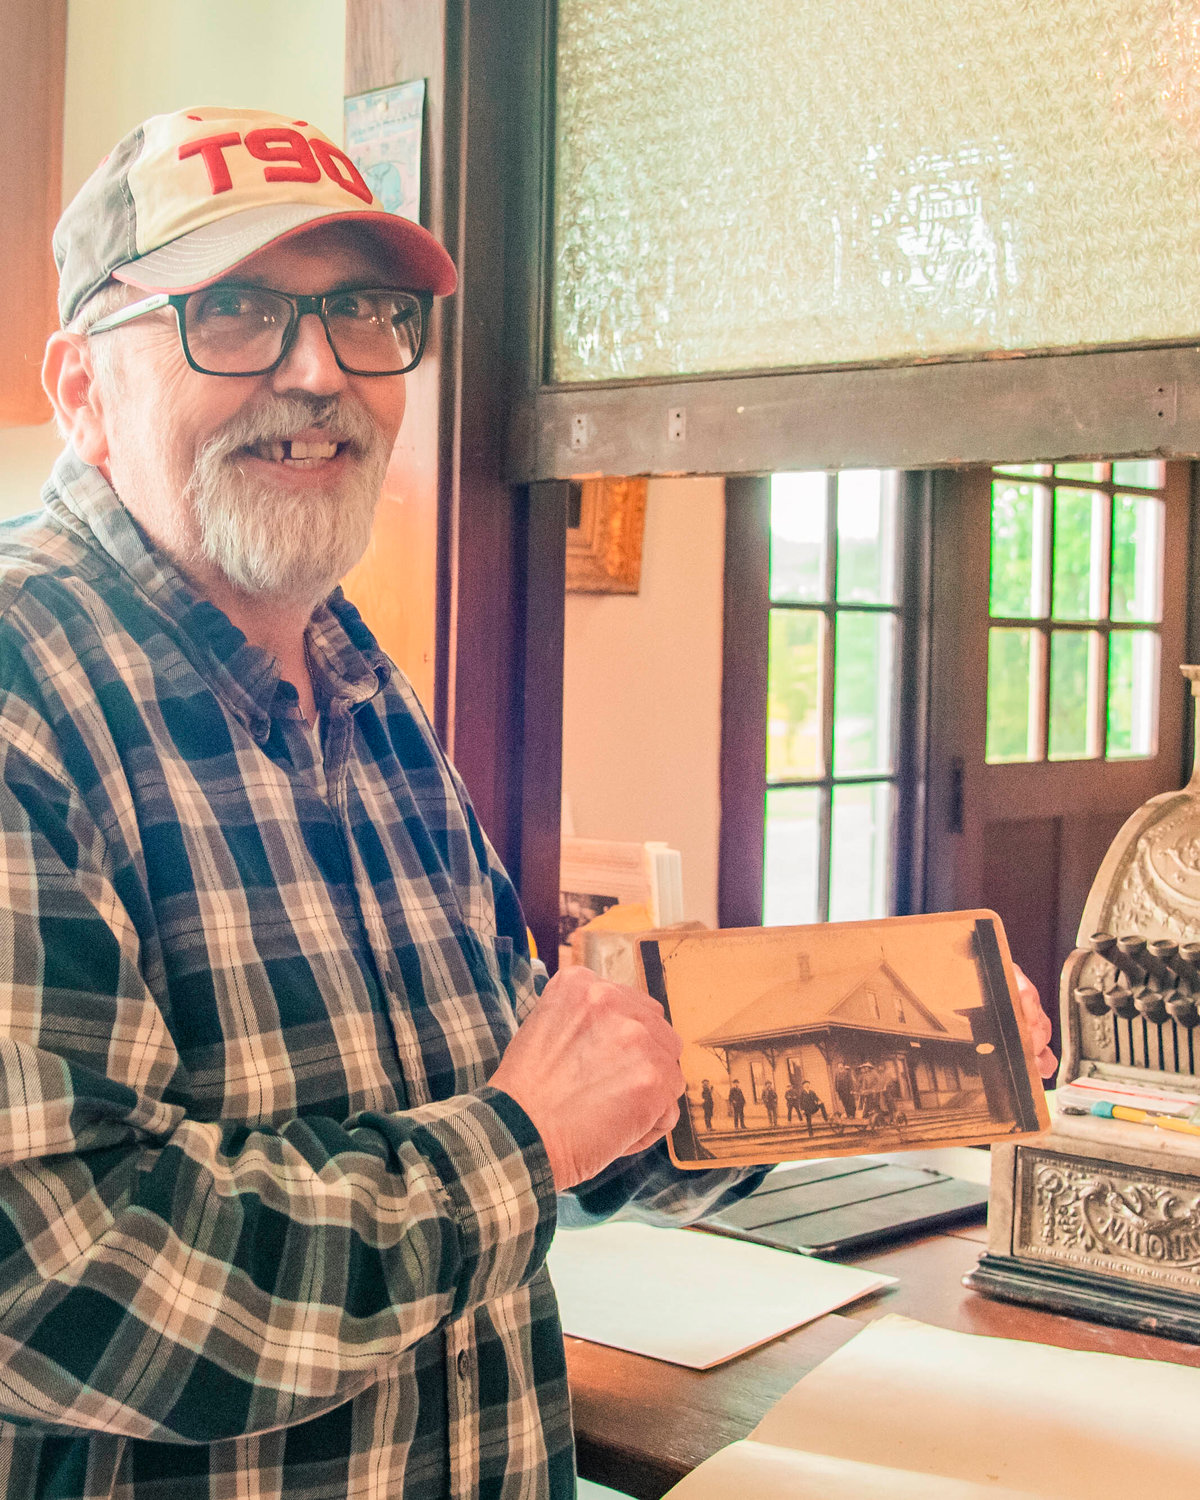 Tenino City Historian Richard Edwards smiles while holding up one of the earliest known photos of Tenino on Tuesday.